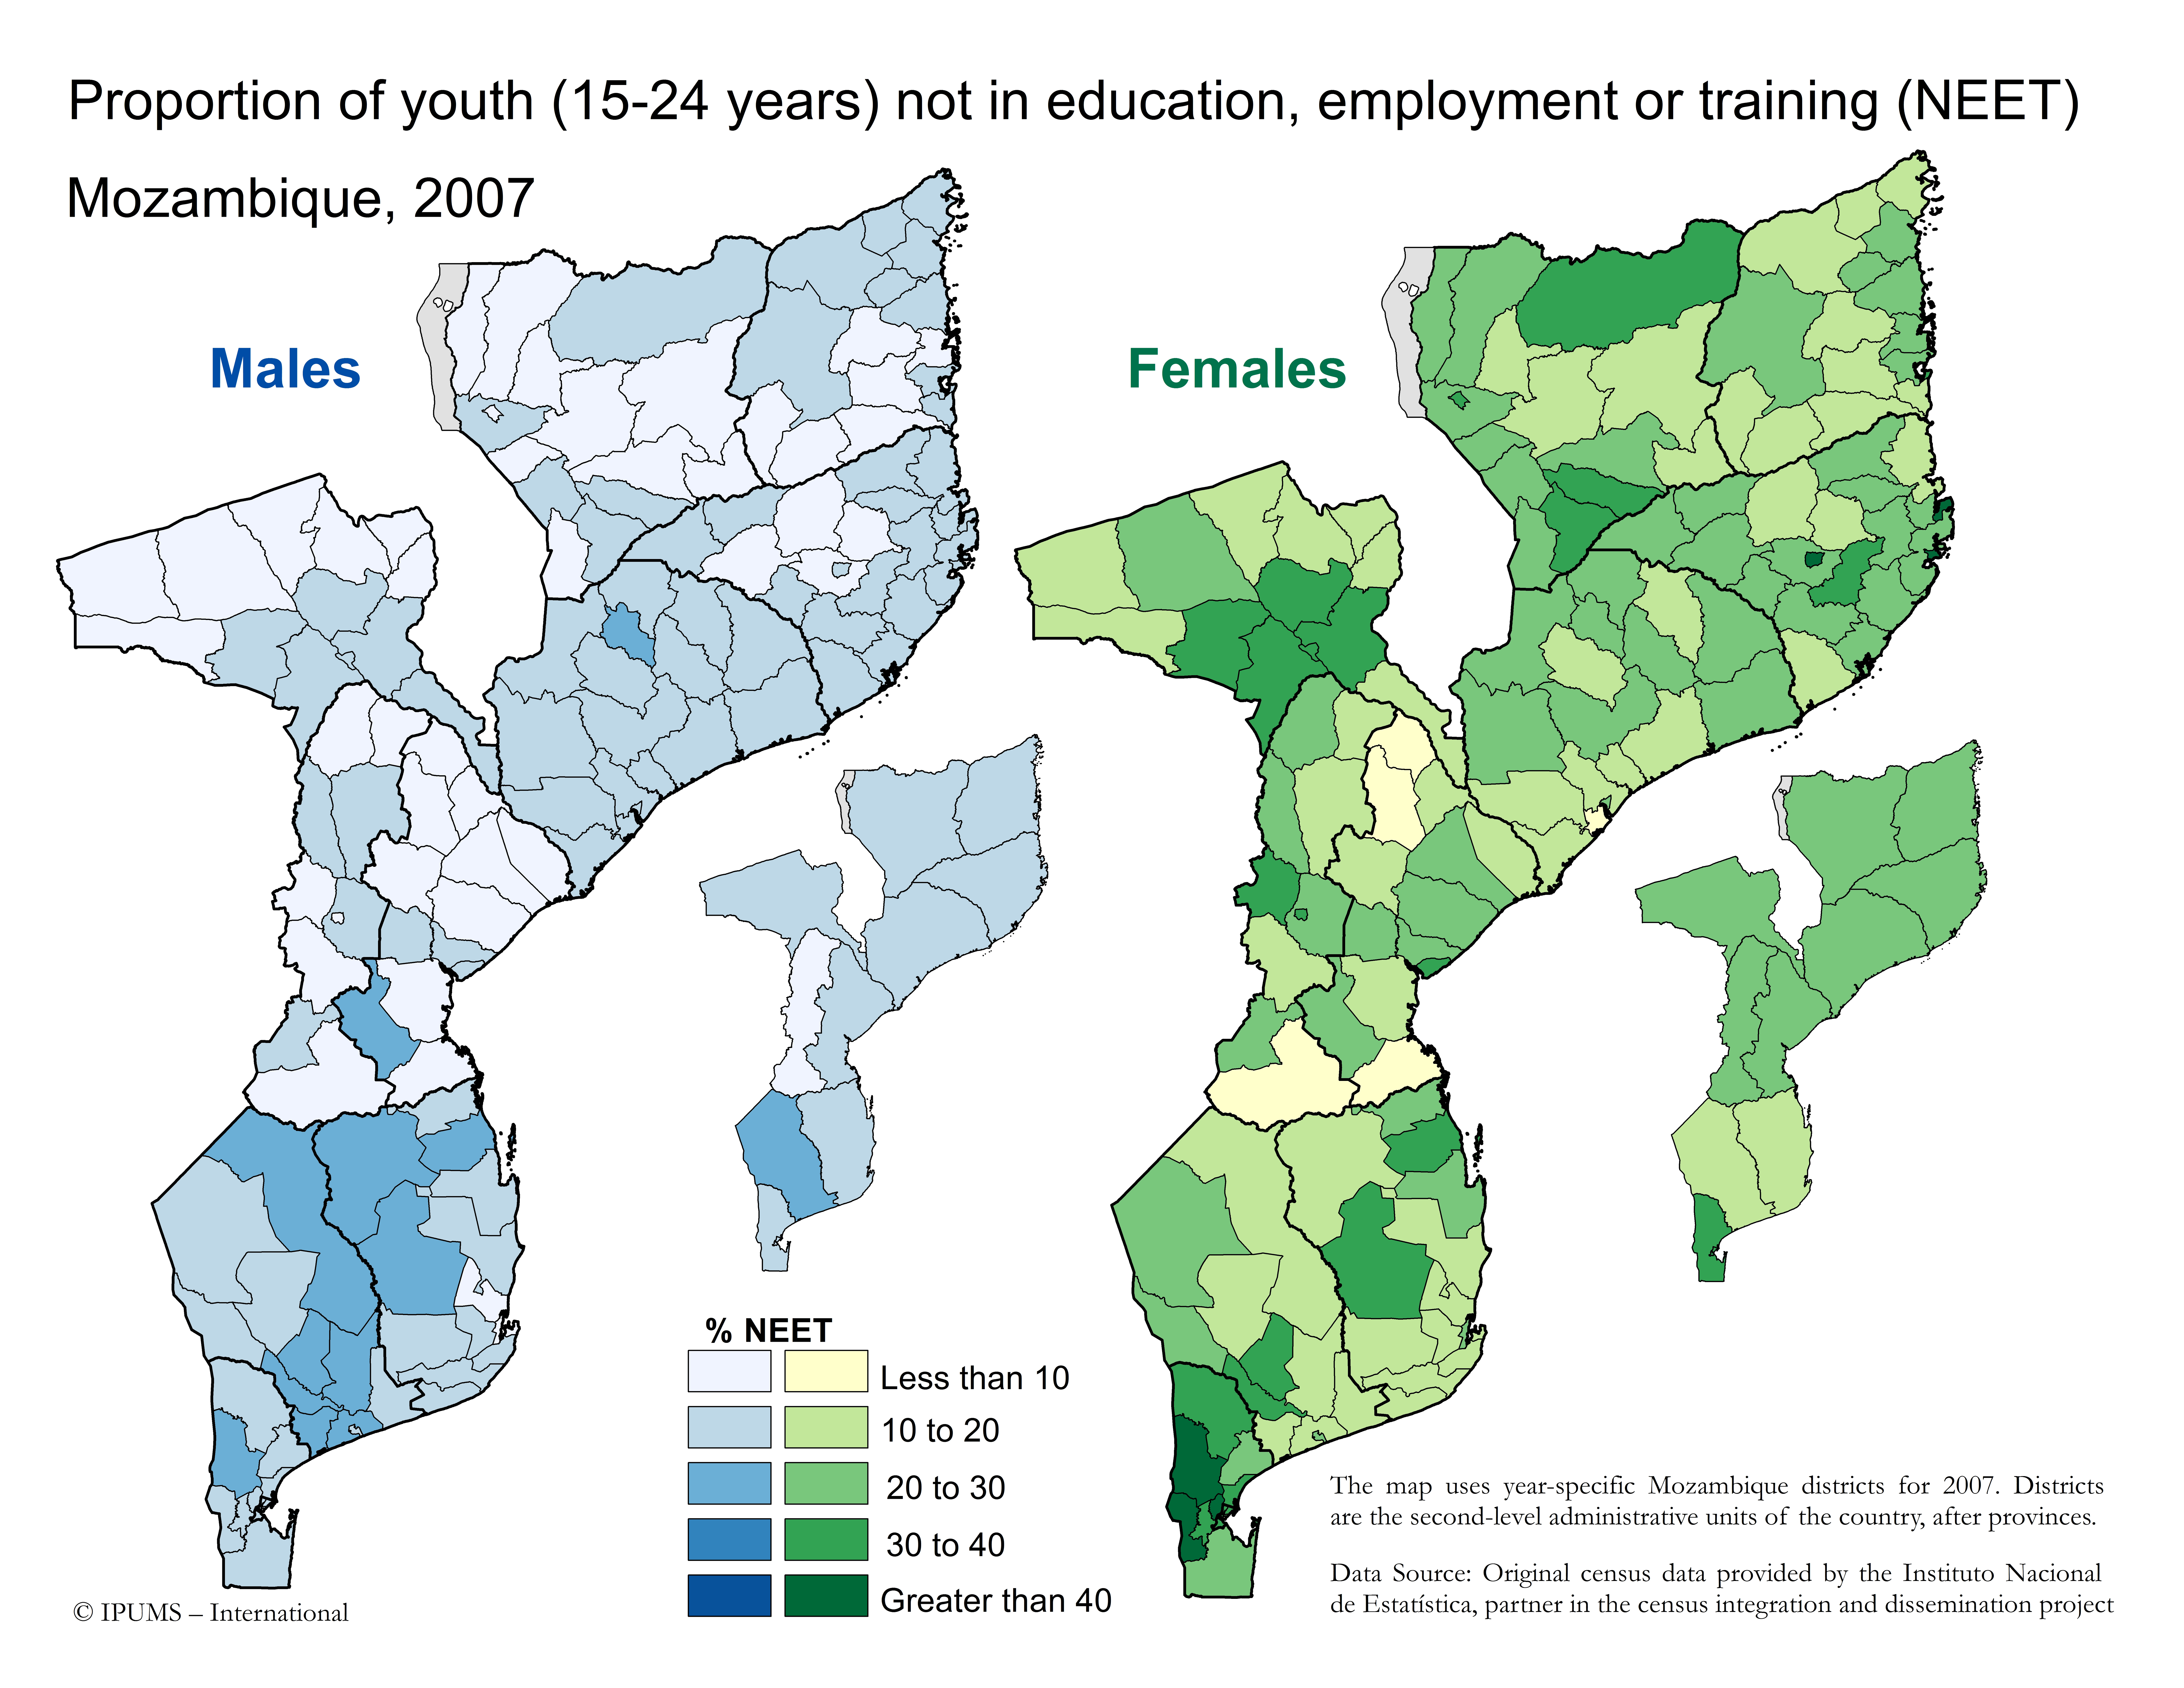 Map showing the proportion of youth (age 15-24 years) who were not in education, employment, or training (NEET) in Mozambique 2007